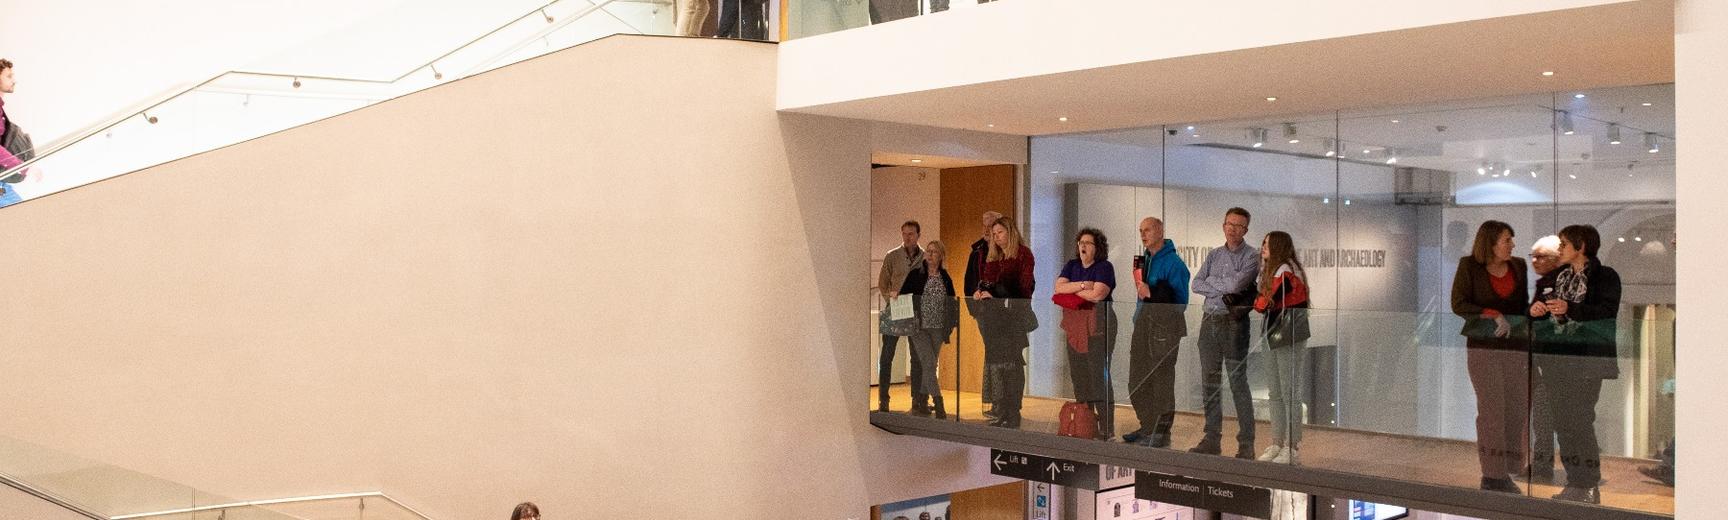 People standing on a balcony at the Ashmolean Museum viewing an exhibition that is out of frame